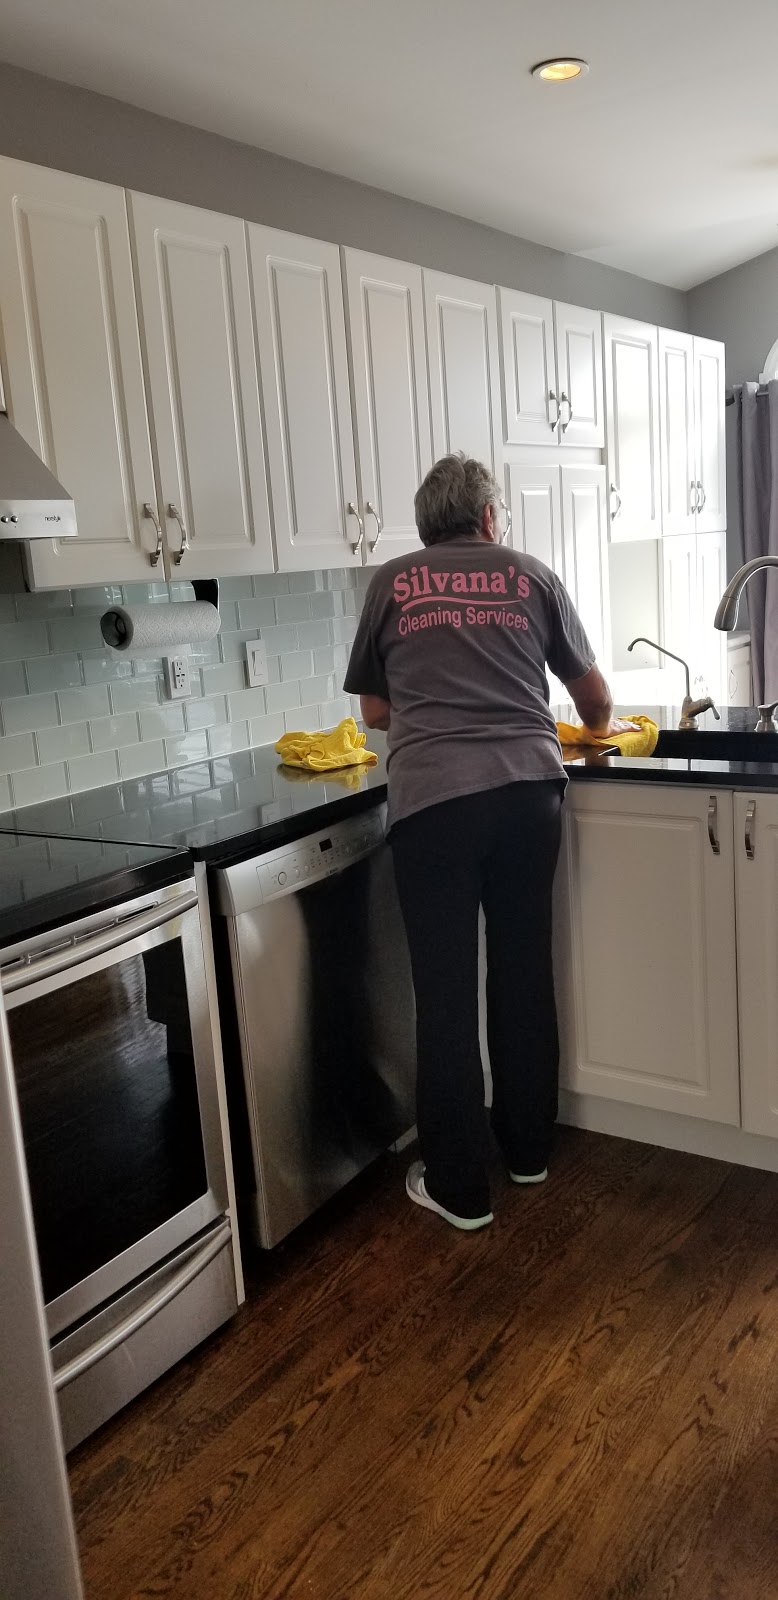 Silvanas & Pauls Cleaning Service | Silvanascleaningservice1@gmail.com, 41 Fairgreen Close, Cambridge, ON N1T 1T7, Canada | Phone: (226) 606-9681